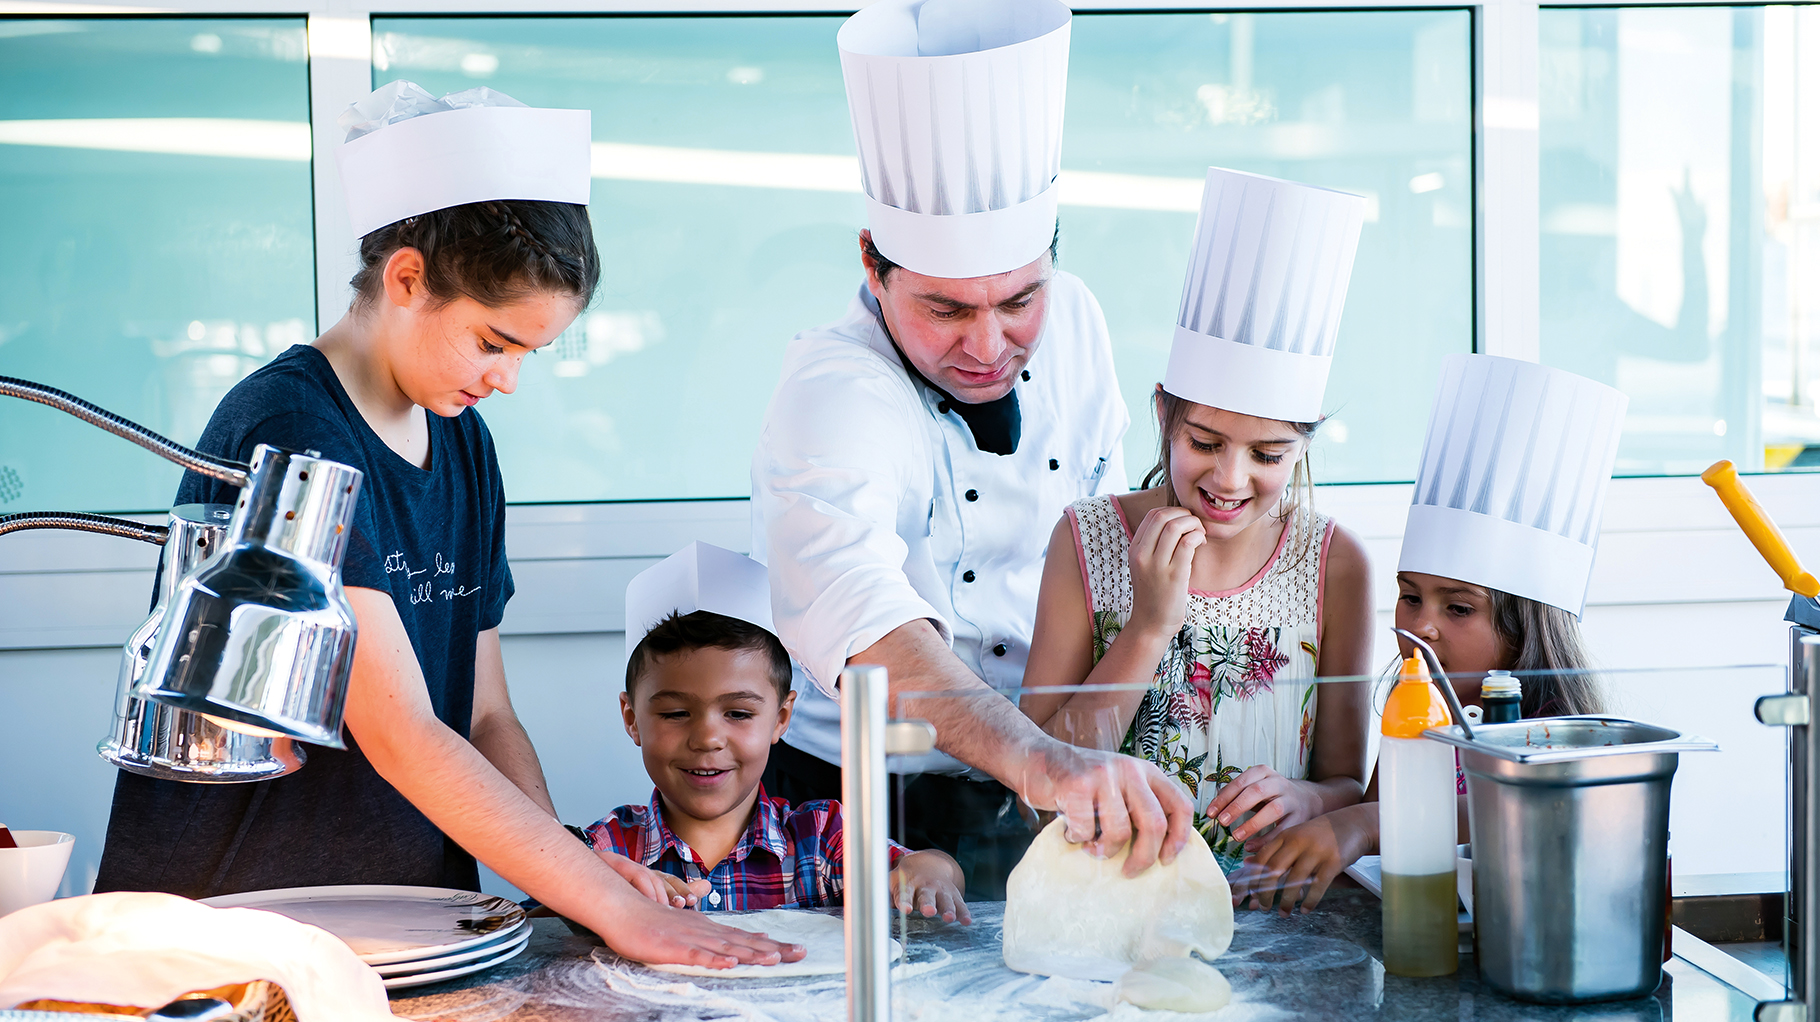 River cruise lines have great options for families